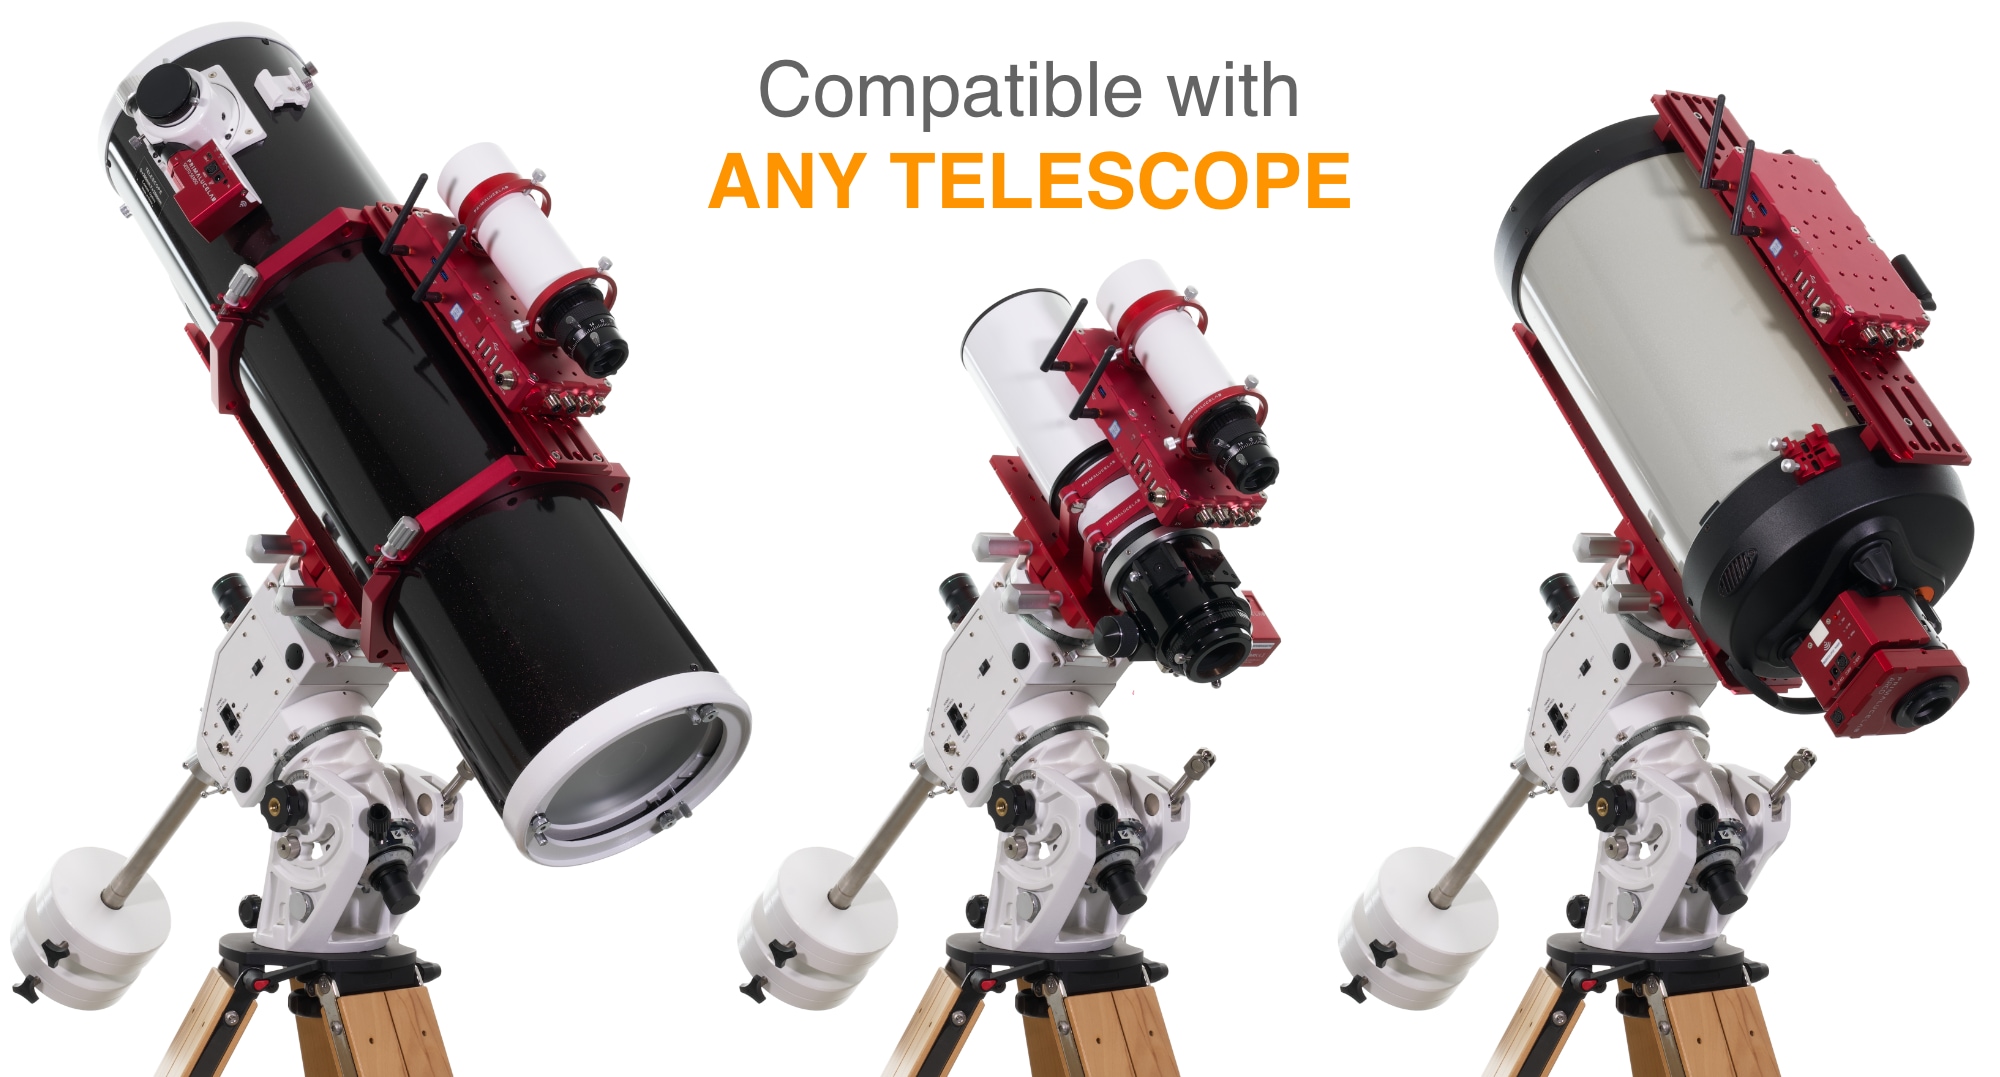 EAGLE5 S computer for telescopes and astrophotography: it works with any telescope